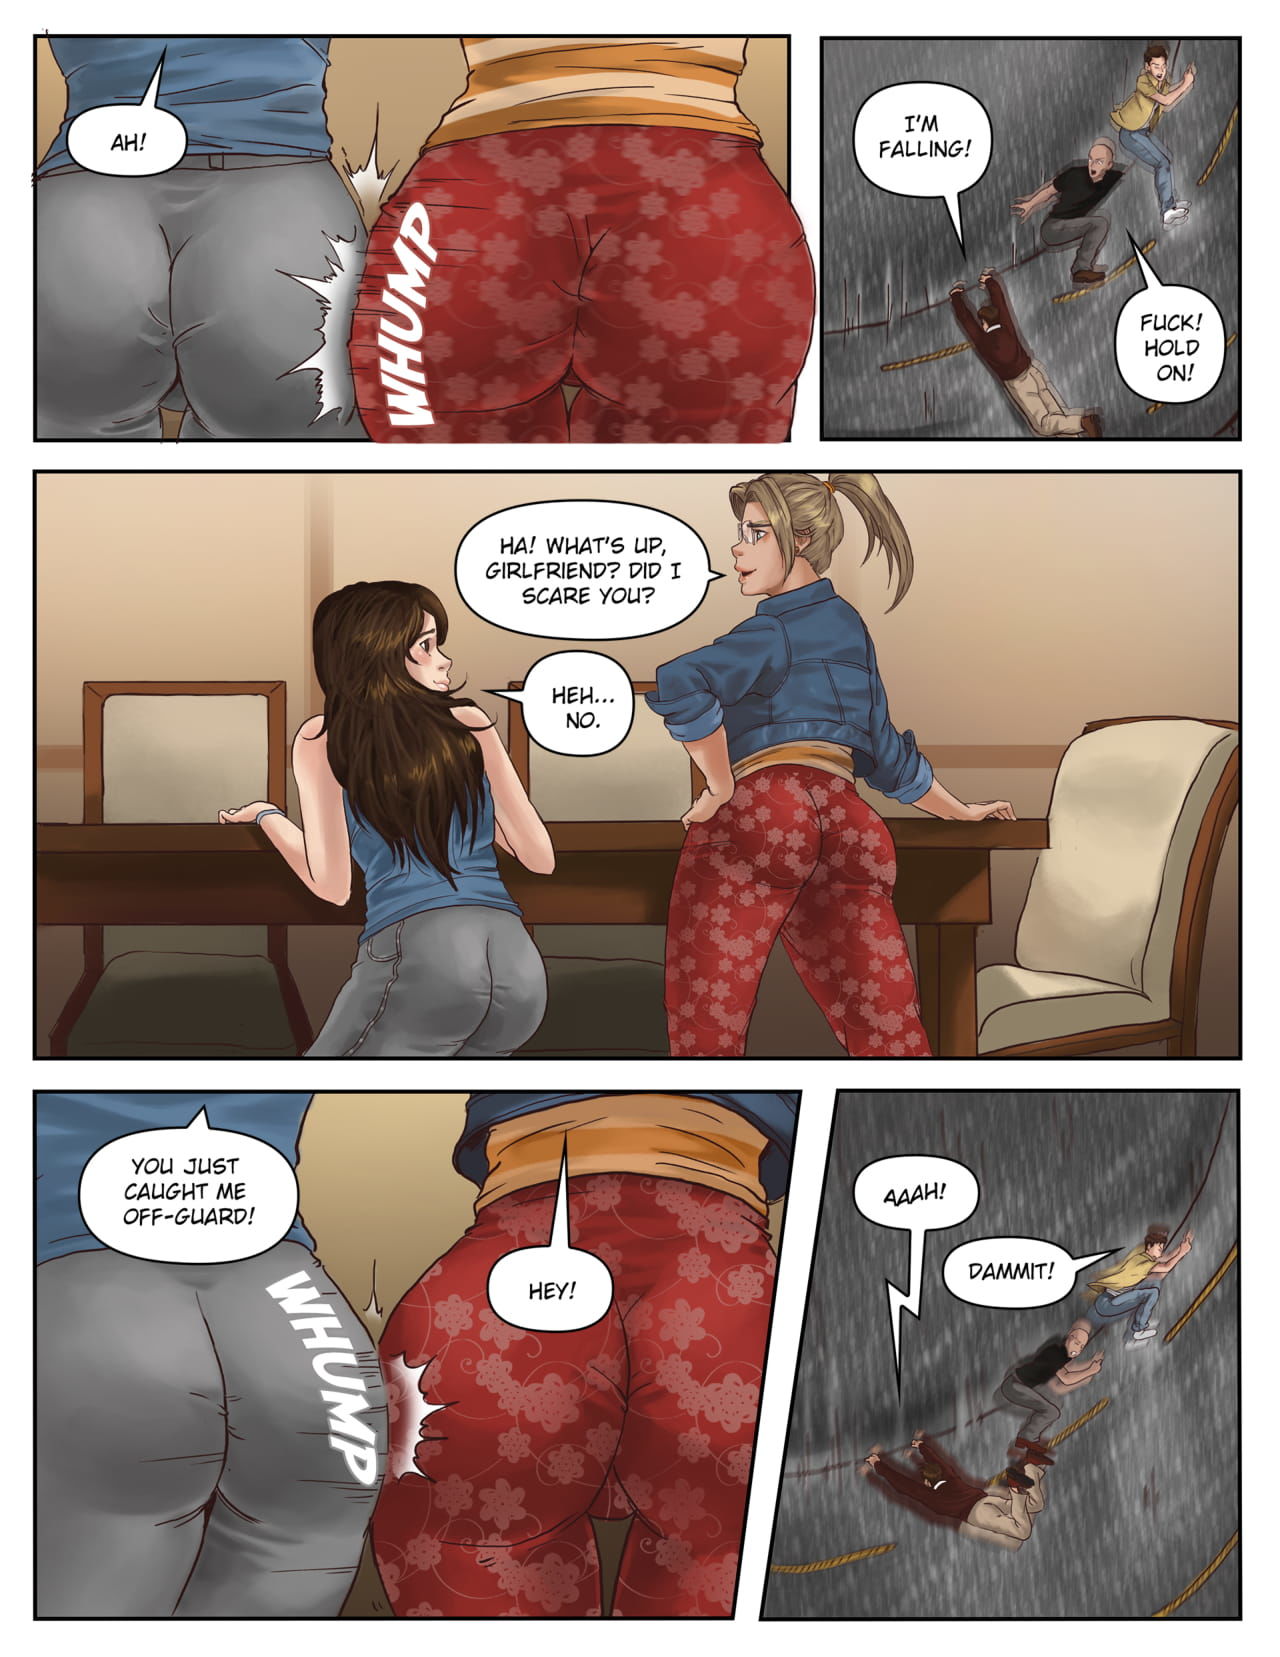 A Weekend Alone Issue 10 Giantess Fan page 5